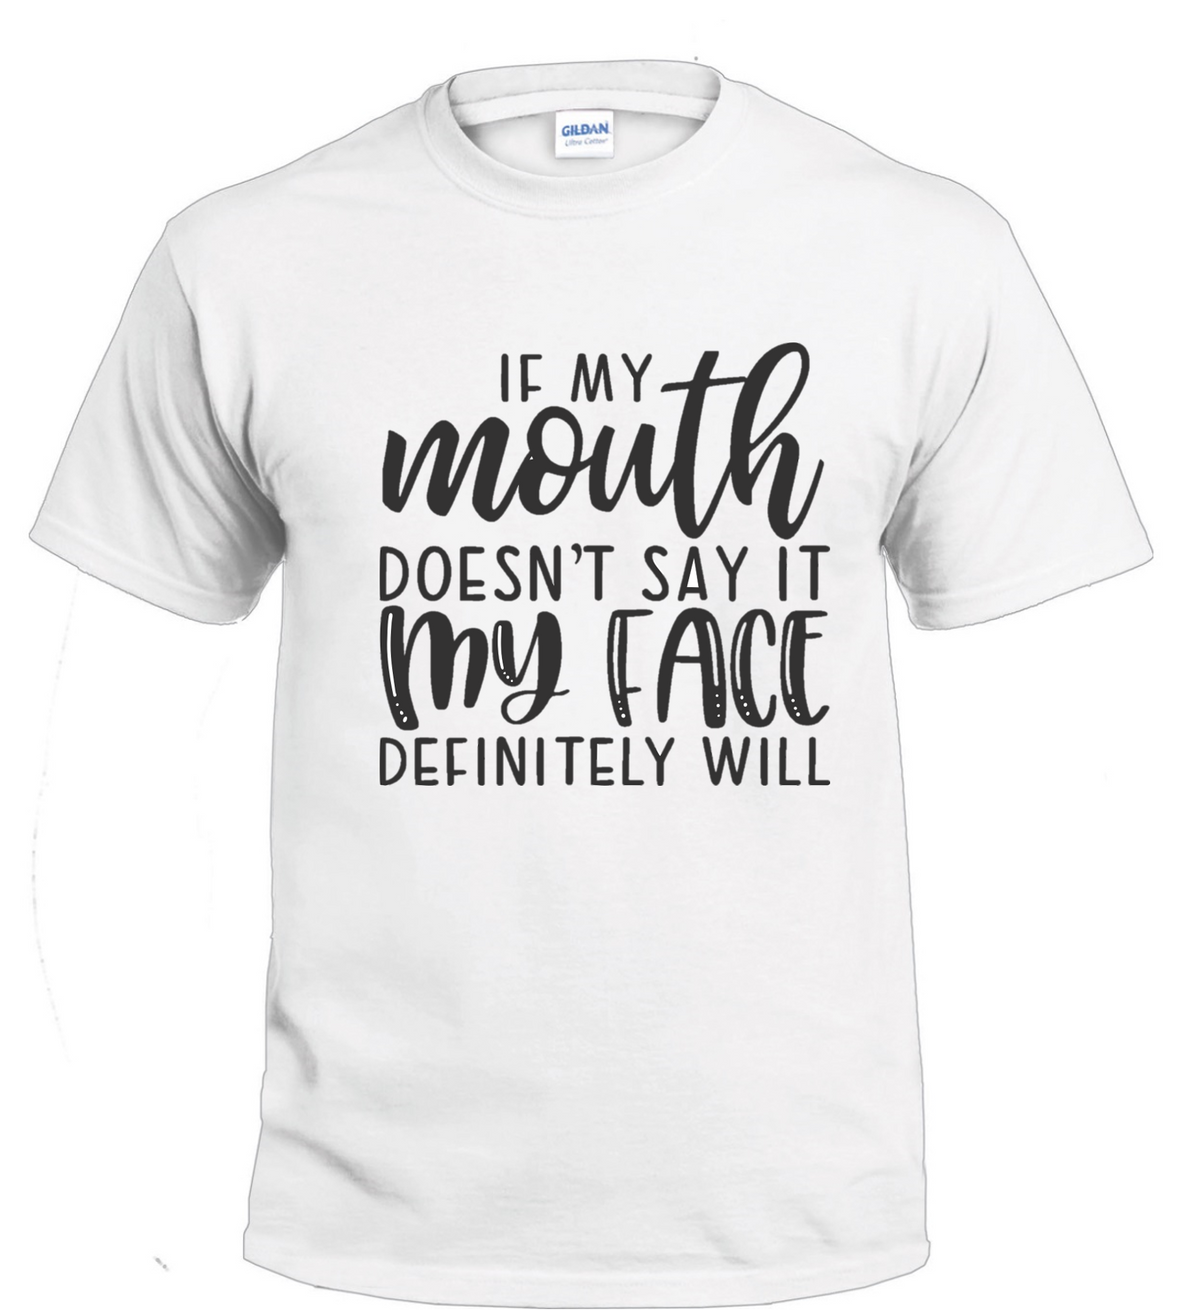 If My Mouth Doesn't Say It My Face Definitely Will Sassy t-shirt